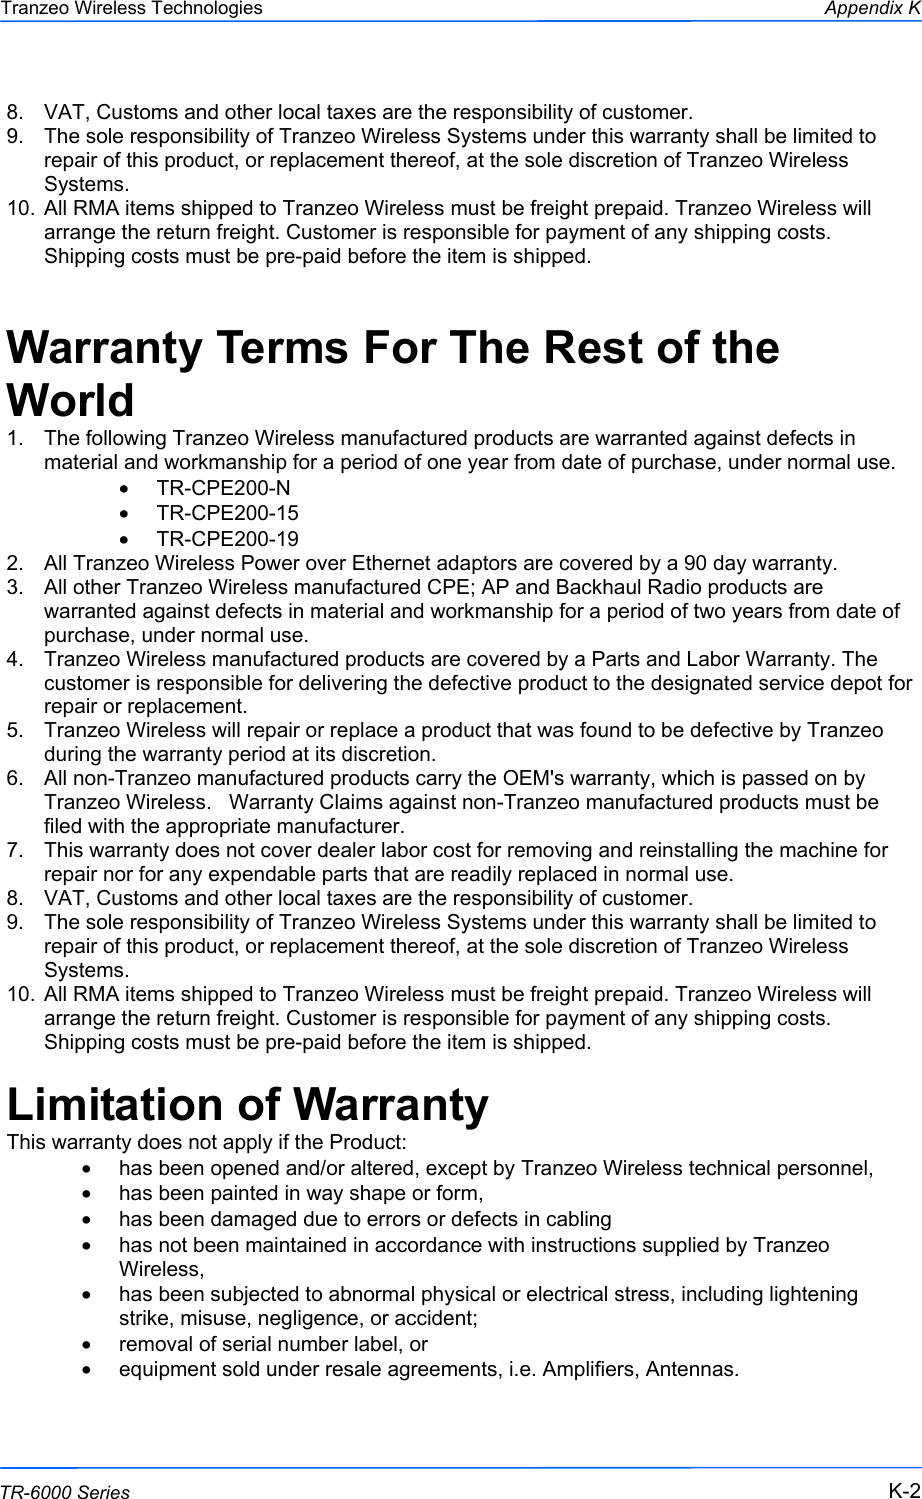  222 This document is intended for Public Distribution                         19473 Fraser Way, Pitt Meadows, B.C. Canada V3Y  2V4 Appendix K K-2 TR-6000 Series Tranzeo Wireless Technologies 8.  VAT, Customs and other local taxes are the responsibility of customer. 9.  The sole responsibility of Tranzeo Wireless Systems under this warranty shall be limited to repair of this product, or replacement thereof, at the sole discretion of Tranzeo Wireless Systems. 10.  All RMA items shipped to Tranzeo Wireless must be freight prepaid. Tranzeo Wireless will arrange the return freight. Customer is responsible for payment of any shipping costs. Shipping costs must be pre-paid before the item is shipped.  Warranty Terms For The Rest of the World 1.  The following Tranzeo Wireless manufactured products are warranted against defects in material and workmanship for a period of one year from date of purchase, under normal use. •  TR-CPE200-N •  TR-CPE200-15 •  TR-CPE200-19 2.  All Tranzeo Wireless Power over Ethernet adaptors are covered by a 90 day warranty. 3.  All other Tranzeo Wireless manufactured CPE; AP and Backhaul Radio products are warranted against defects in material and workmanship for a period of two years from date of purchase, under normal use. 4.  Tranzeo Wireless manufactured products are covered by a Parts and Labor Warranty. The customer is responsible for delivering the defective product to the designated service depot for repair or replacement. 5.  Tranzeo Wireless will repair or replace a product that was found to be defective by Tranzeo during the warranty period at its discretion. 6.  All non-Tranzeo manufactured products carry the OEM&apos;s warranty, which is passed on by Tranzeo Wireless.   Warranty Claims against non-Tranzeo manufactured products must be filed with the appropriate manufacturer. 7.  This warranty does not cover dealer labor cost for removing and reinstalling the machine for repair nor for any expendable parts that are readily replaced in normal use. 8.  VAT, Customs and other local taxes are the responsibility of customer. 9.  The sole responsibility of Tranzeo Wireless Systems under this warranty shall be limited to repair of this product, or replacement thereof, at the sole discretion of Tranzeo Wireless Systems. 10.  All RMA items shipped to Tranzeo Wireless must be freight prepaid. Tranzeo Wireless will arrange the return freight. Customer is responsible for payment of any shipping costs. Shipping costs must be pre-paid before the item is shipped.  Limitation of Warranty This warranty does not apply if the Product: •  has been opened and/or altered, except by Tranzeo Wireless technical personnel, •  has been painted in way shape or form, •  has been damaged due to errors or defects in cabling •  has not been maintained in accordance with instructions supplied by Tranzeo Wireless, •  has been subjected to abnormal physical or electrical stress, including lightening strike, misuse, negligence, or accident; •  removal of serial number label, or •  equipment sold under resale agreements, i.e. Amplifiers, Antennas.  